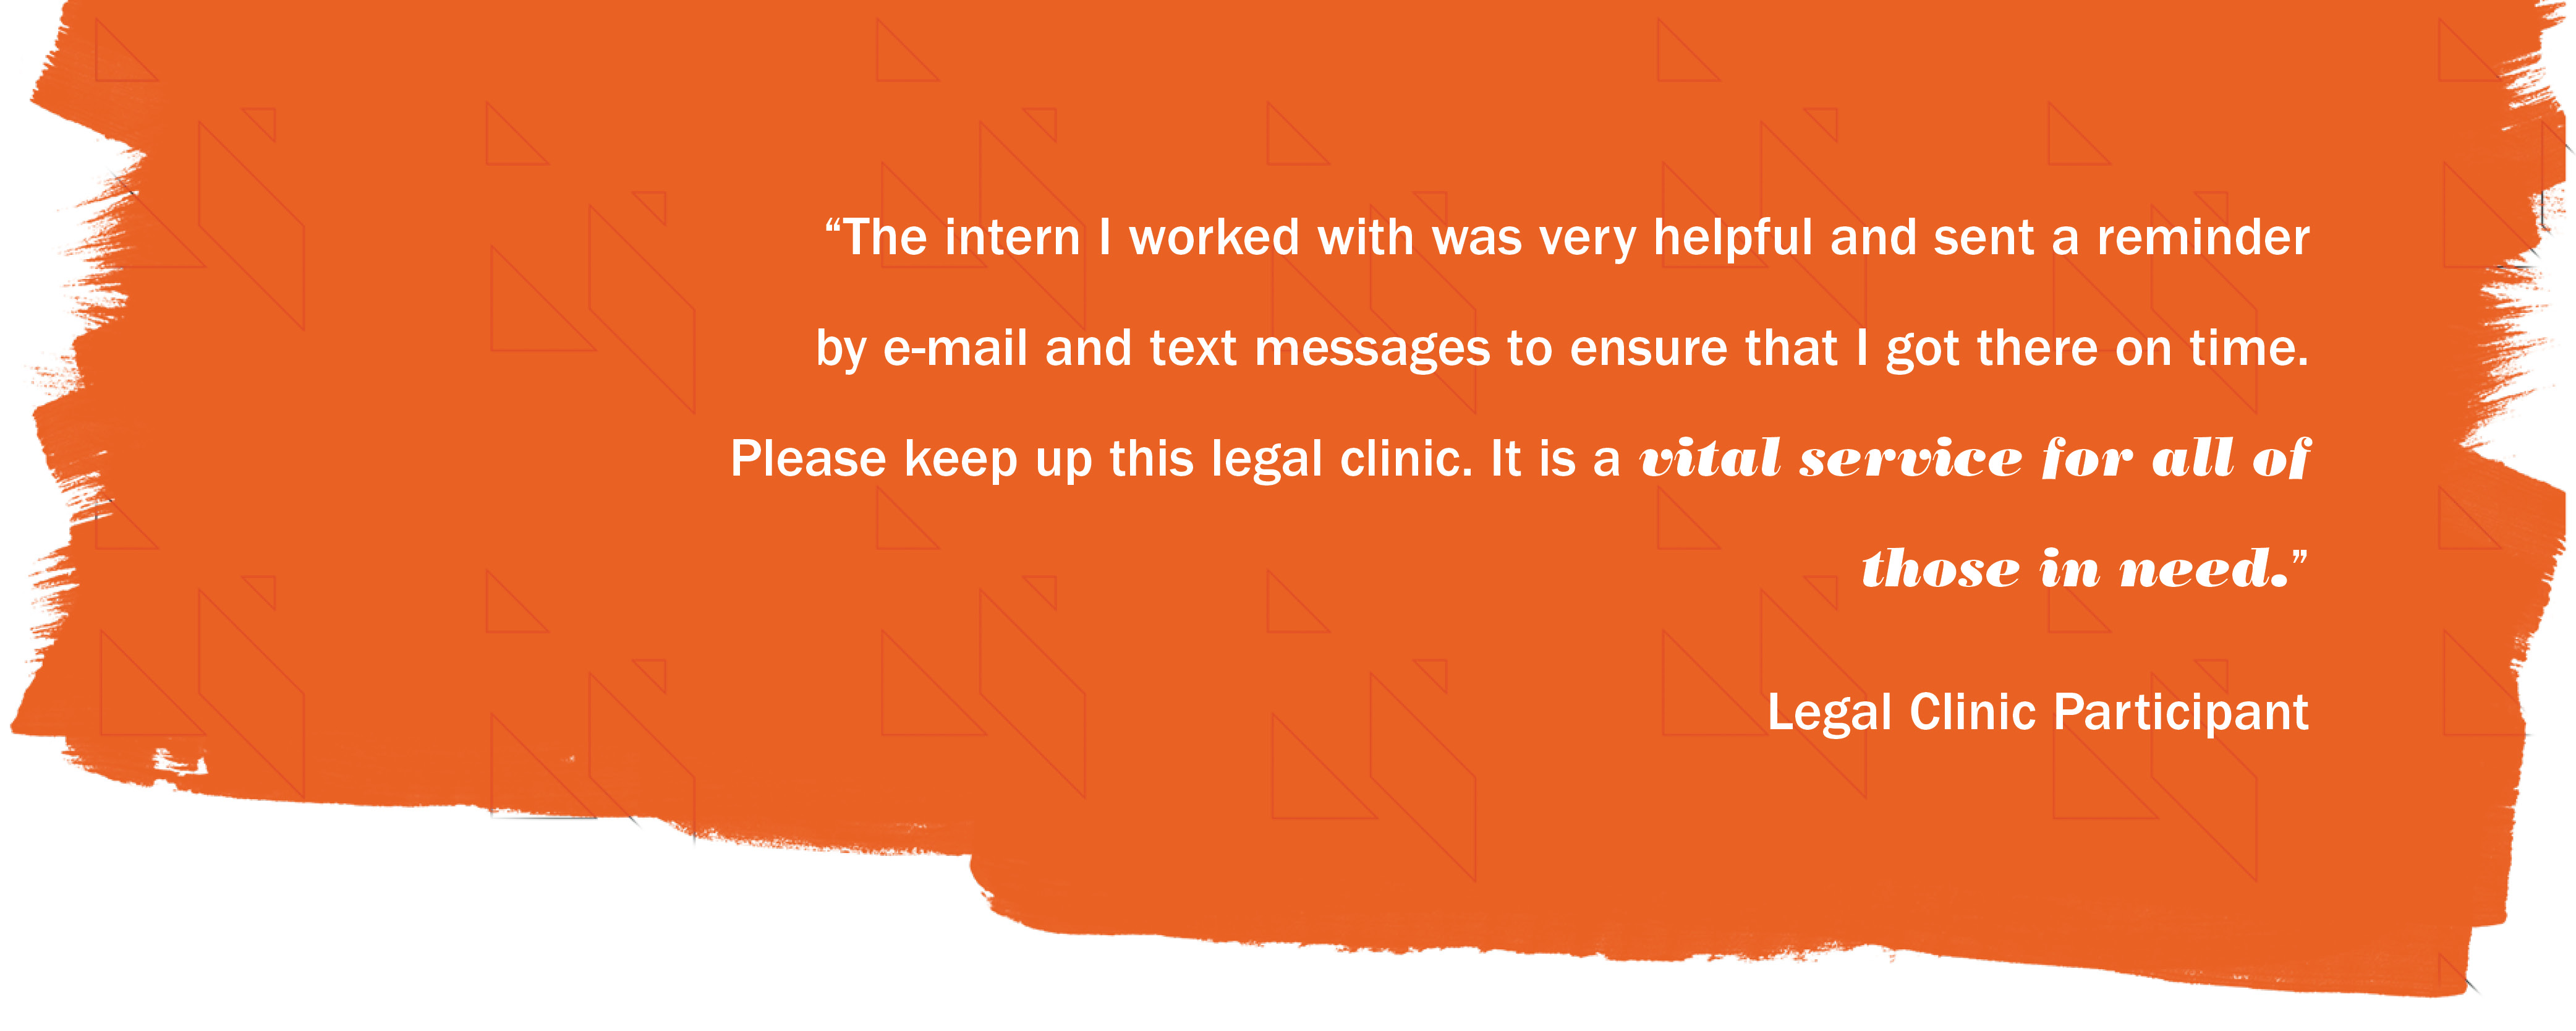 "The intern I worked with was very helpful l and sent a reminder by e-mail and text messages to ensure that I got there on time.  Please keep up this legal clinic.  It is a vital service for all of those in need." - Legal Clinic Participant